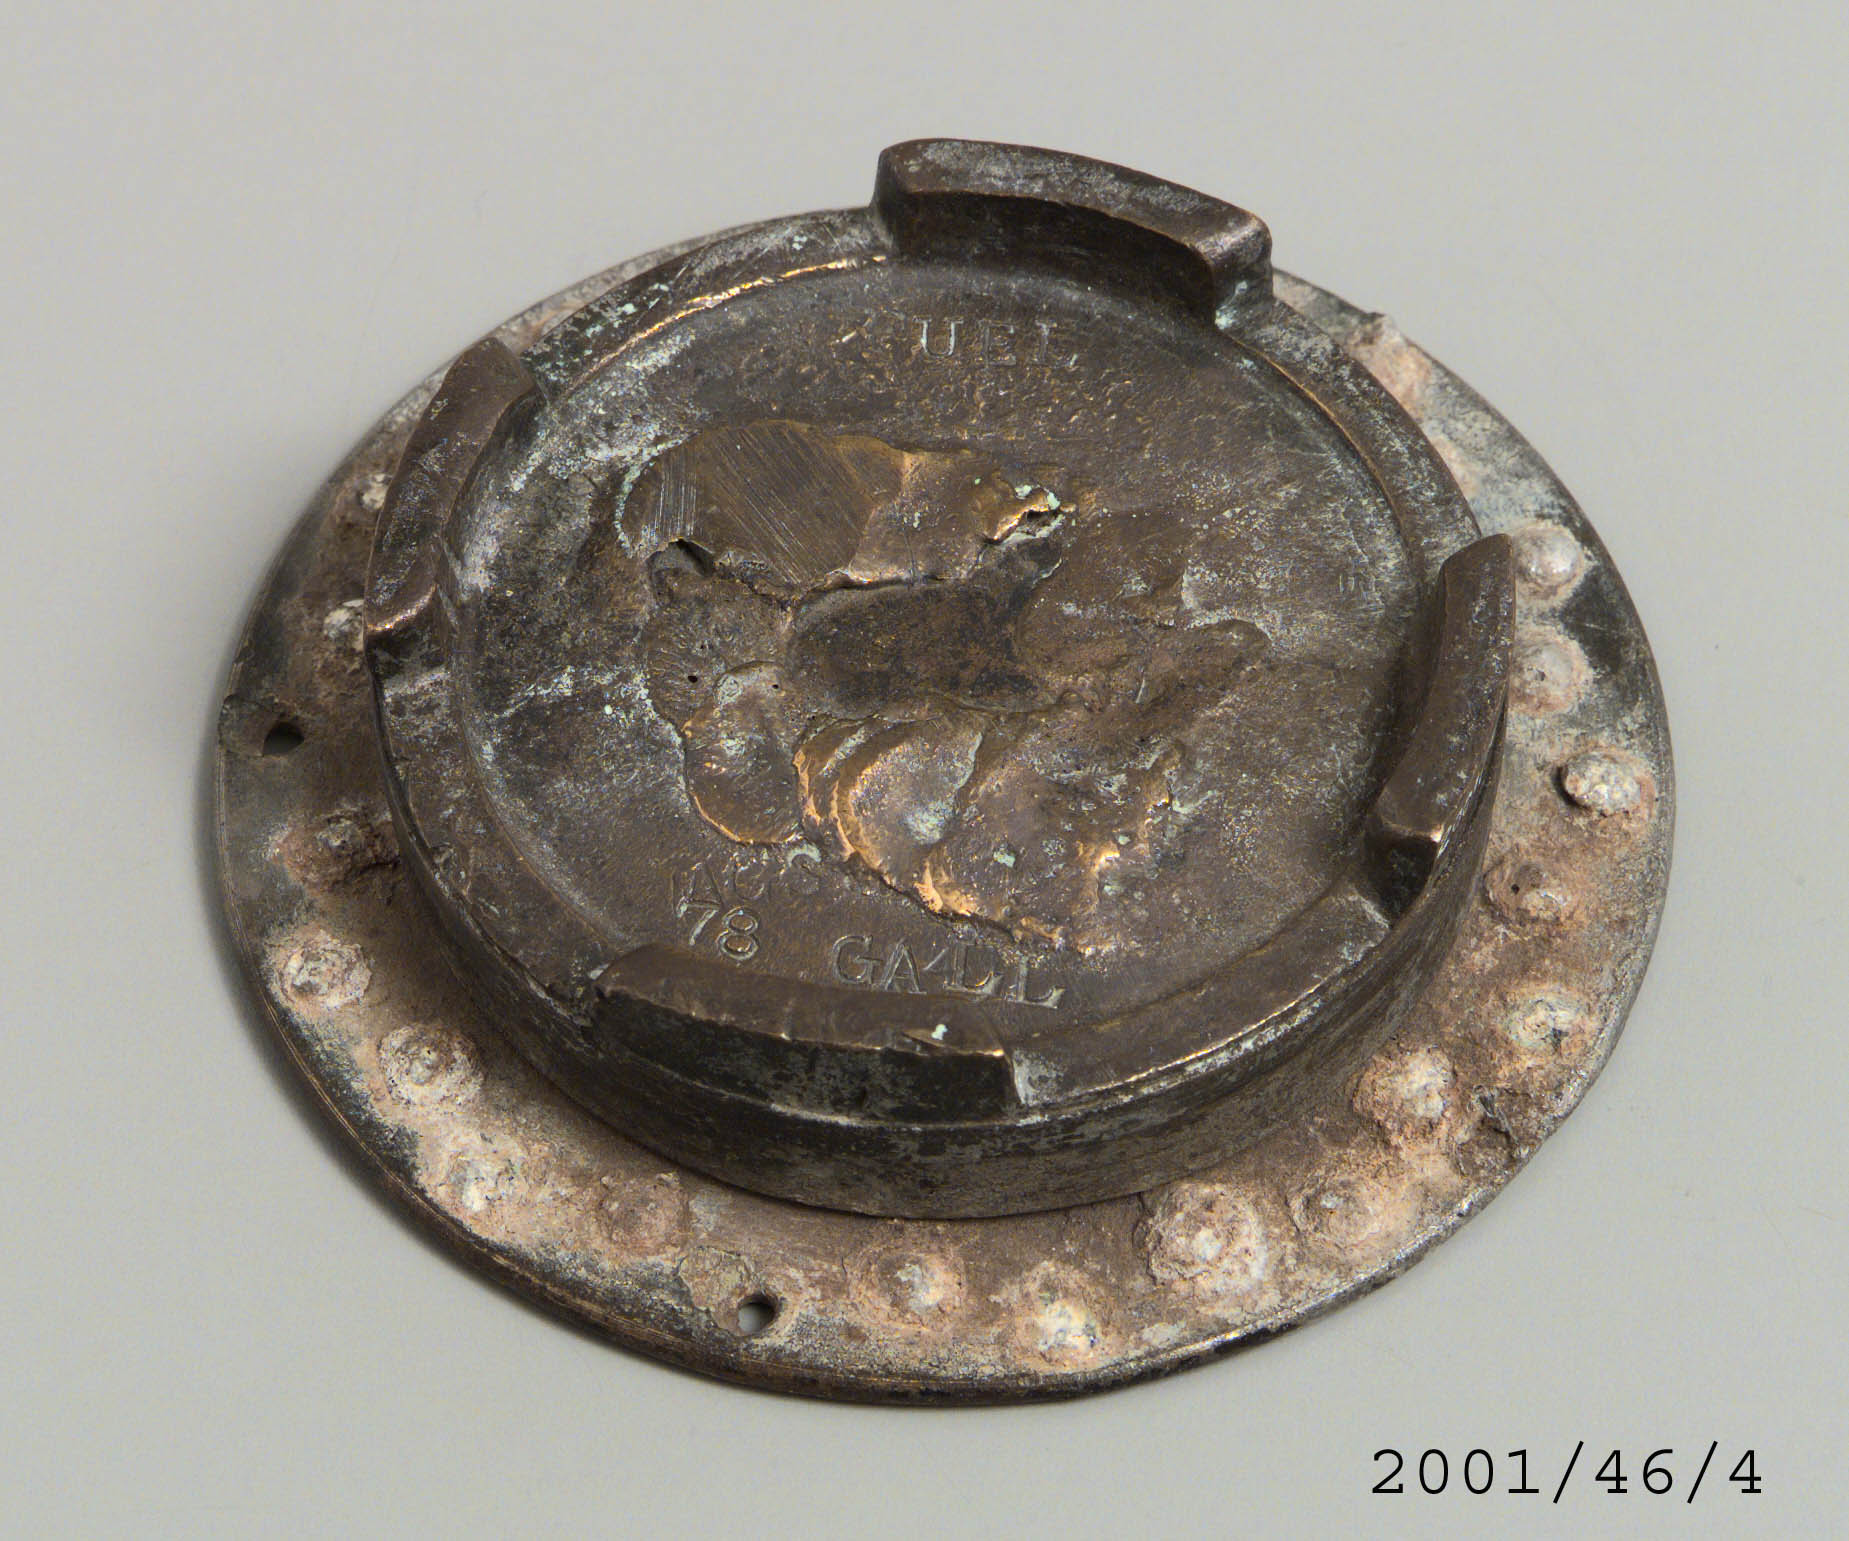 Fuel cap from 'Southern Cloud' aircraft